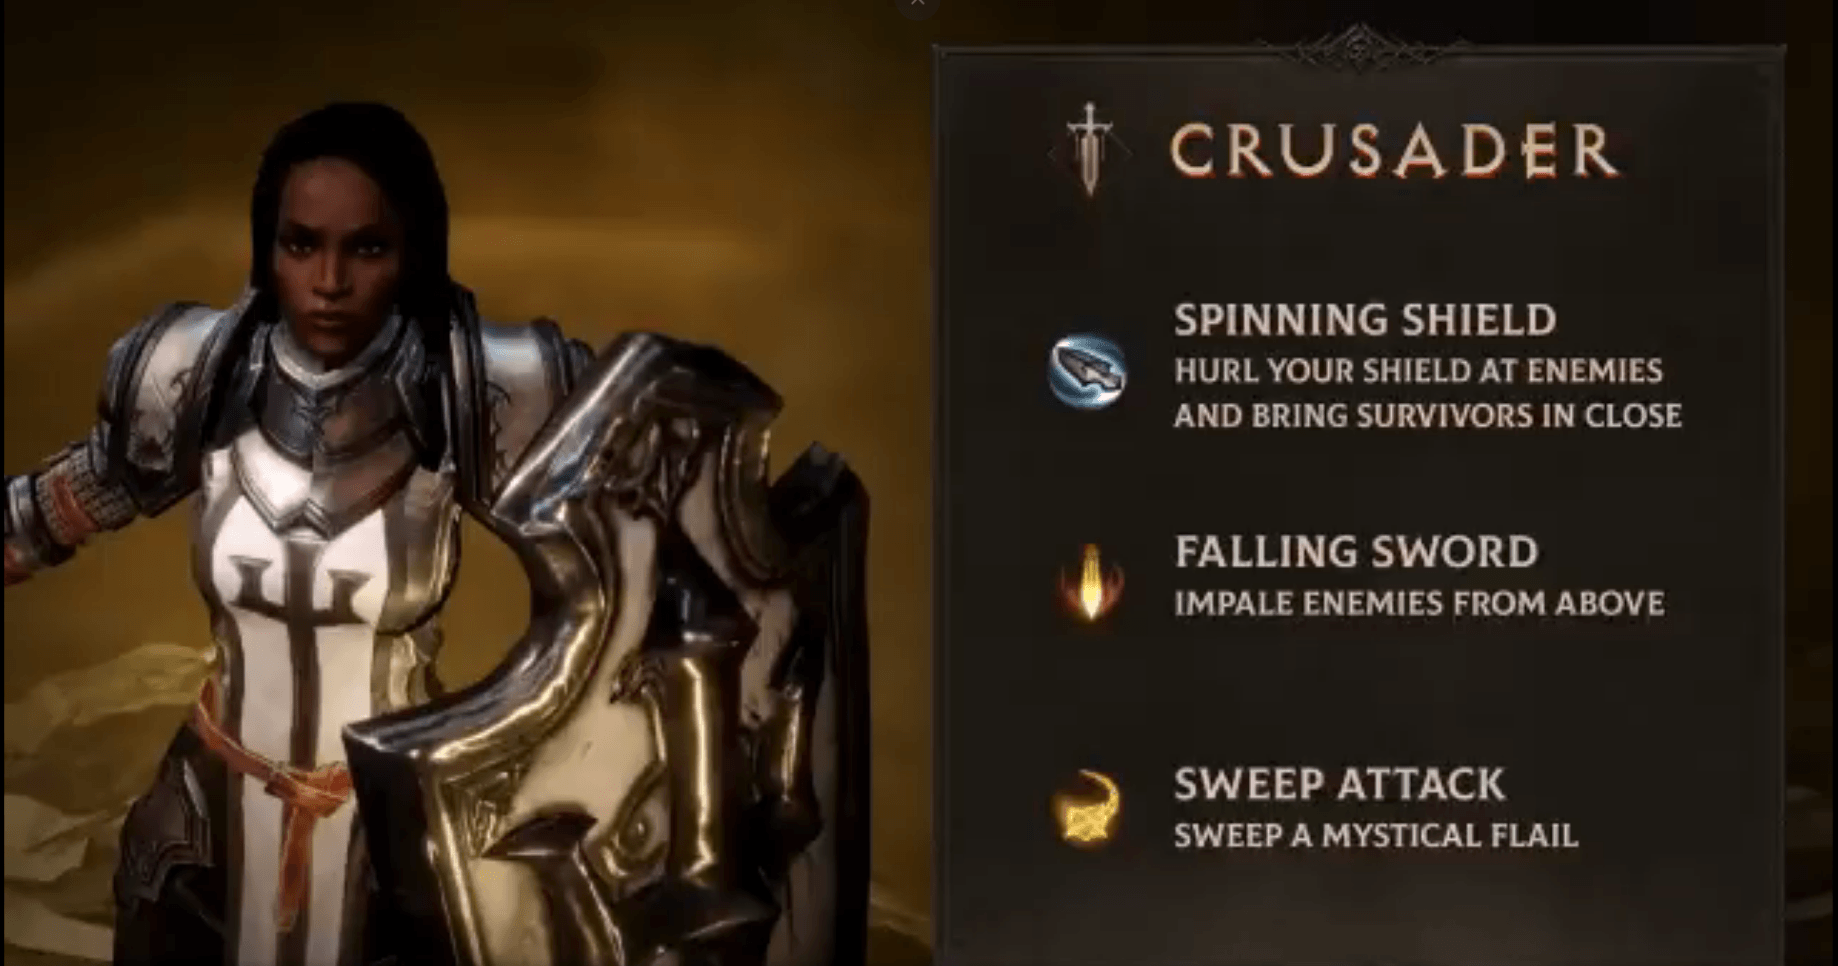 Diablo Immortal to conduct next closed alpha testing phase in Australia; to reveal more endgame content